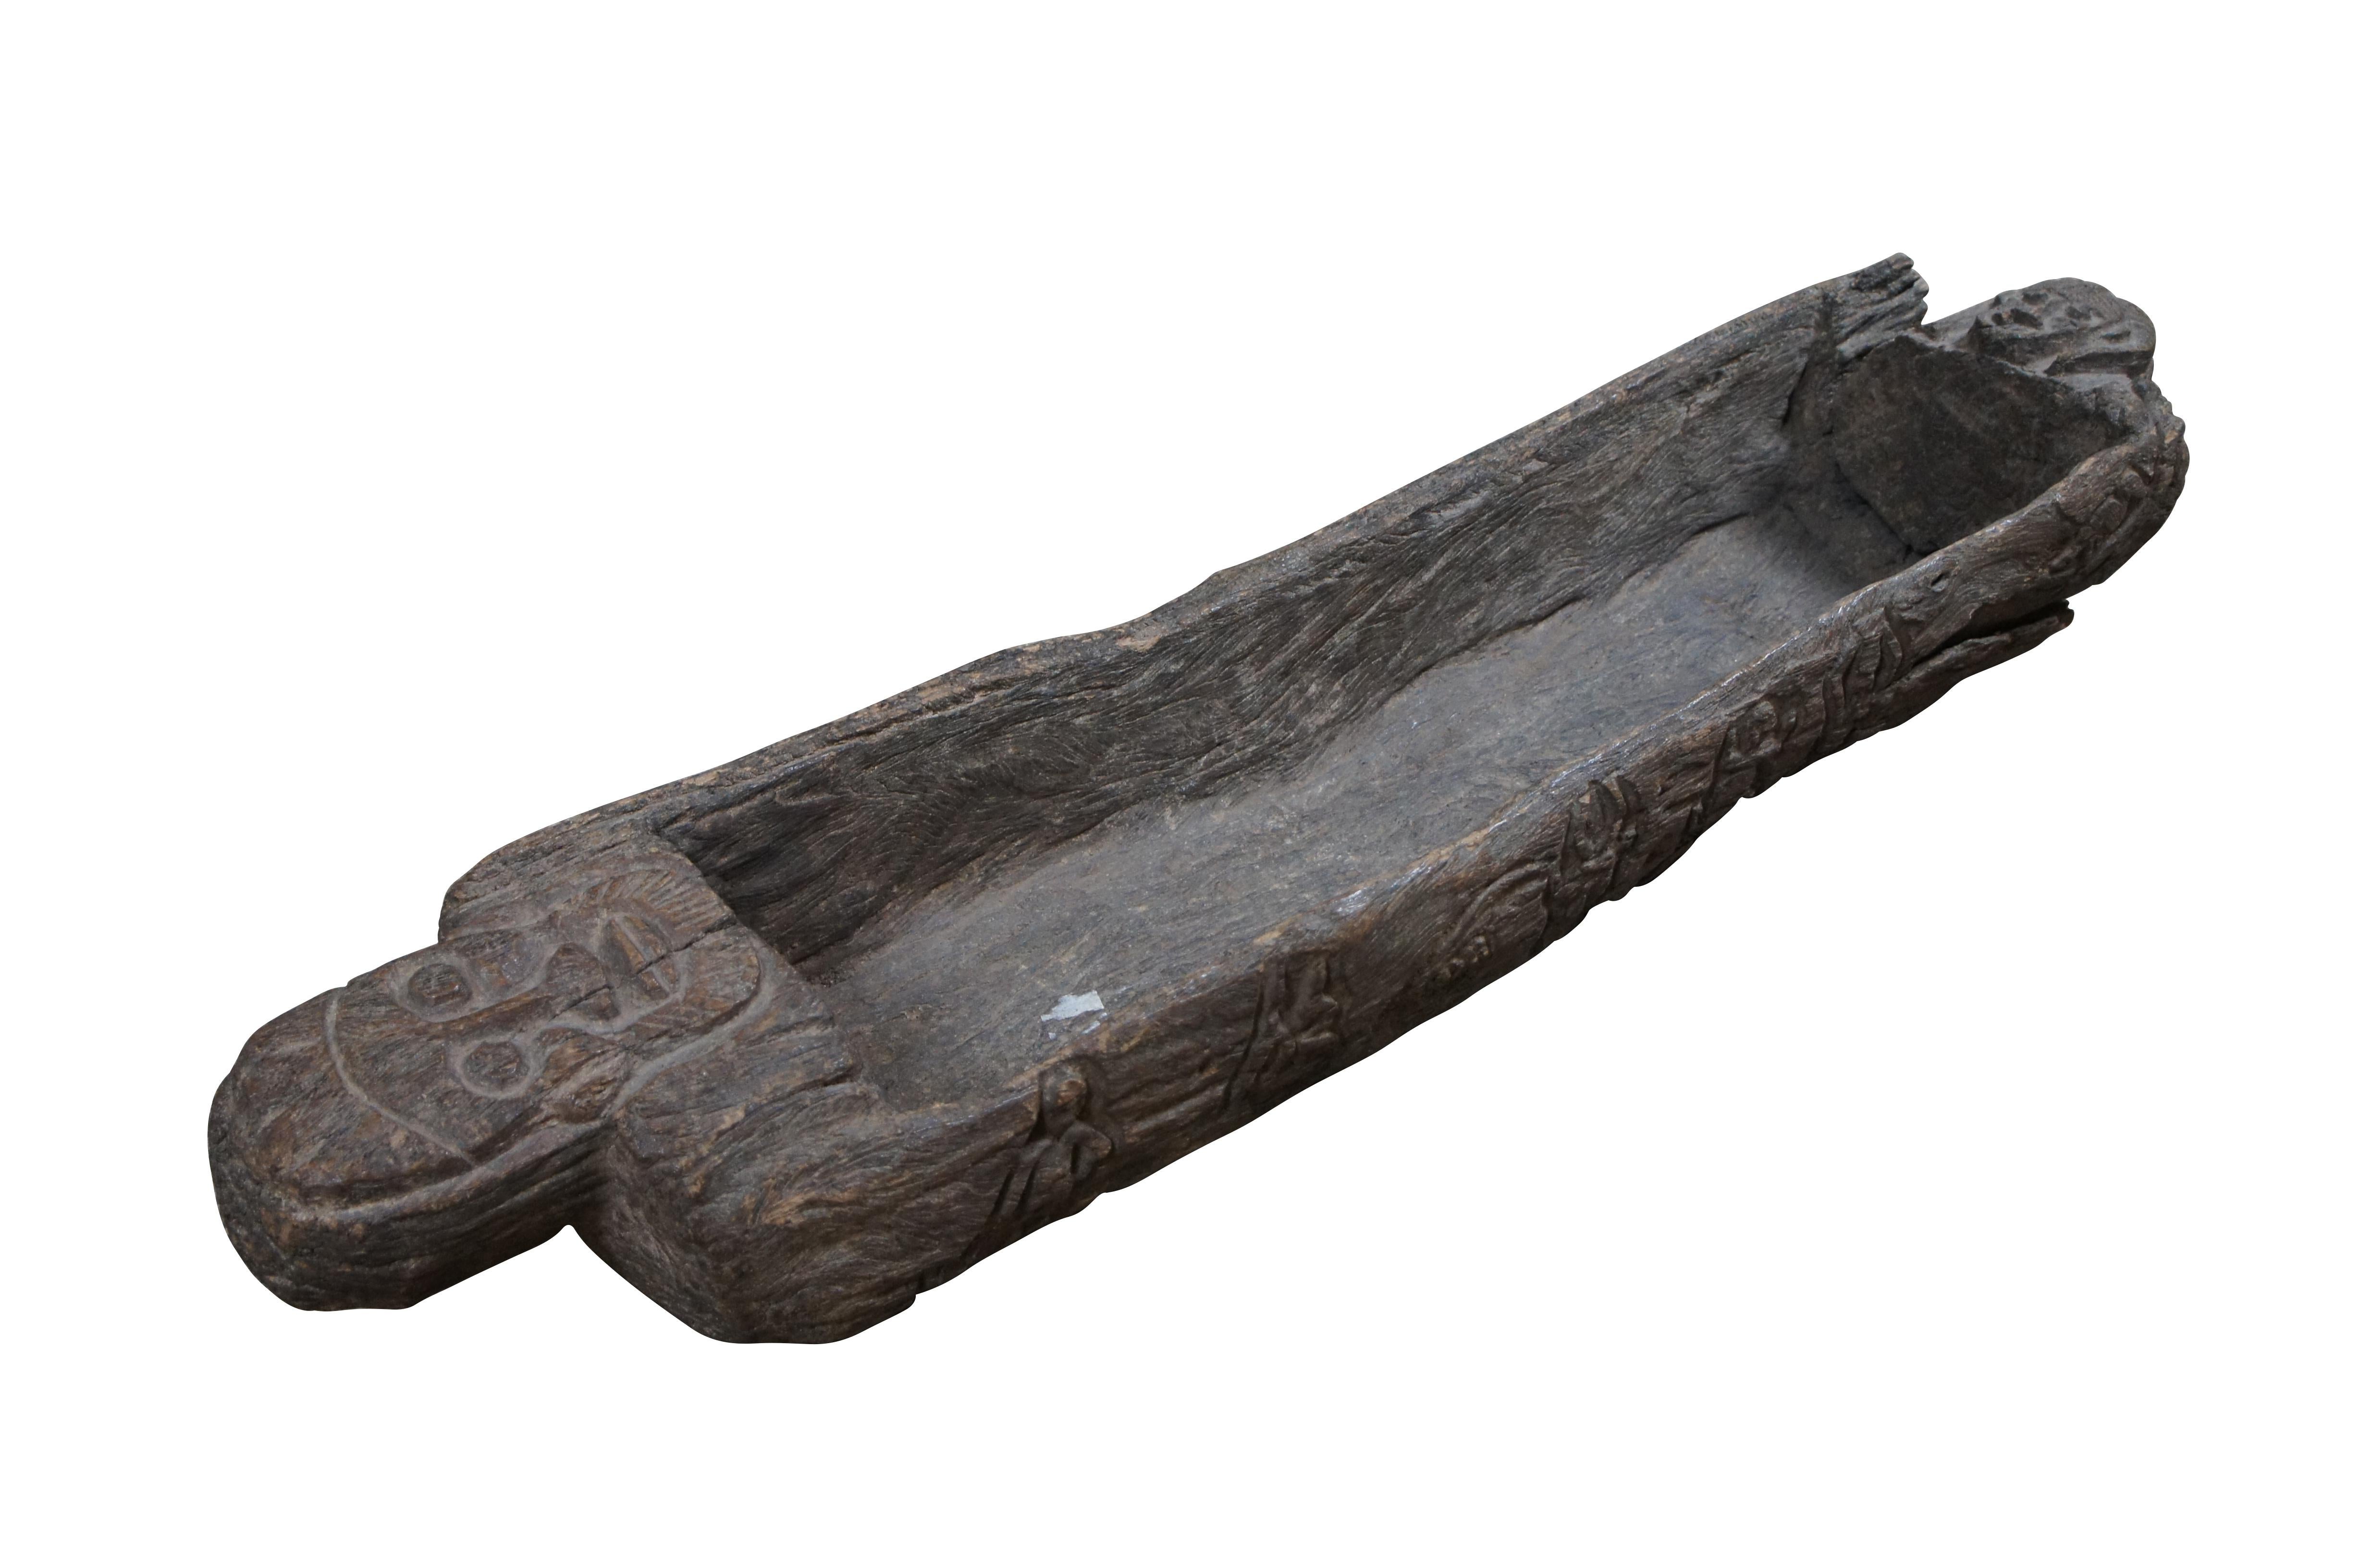 Rare antique primitive African Dogon Peoples Aduno Koro - Ark of the World - ceremonial vessel or trough.

The Aduno Koro (ark of the world) is a trough-like vessel used to hold the raw and cooked meat of sheep and / or goats that are sacrificed at